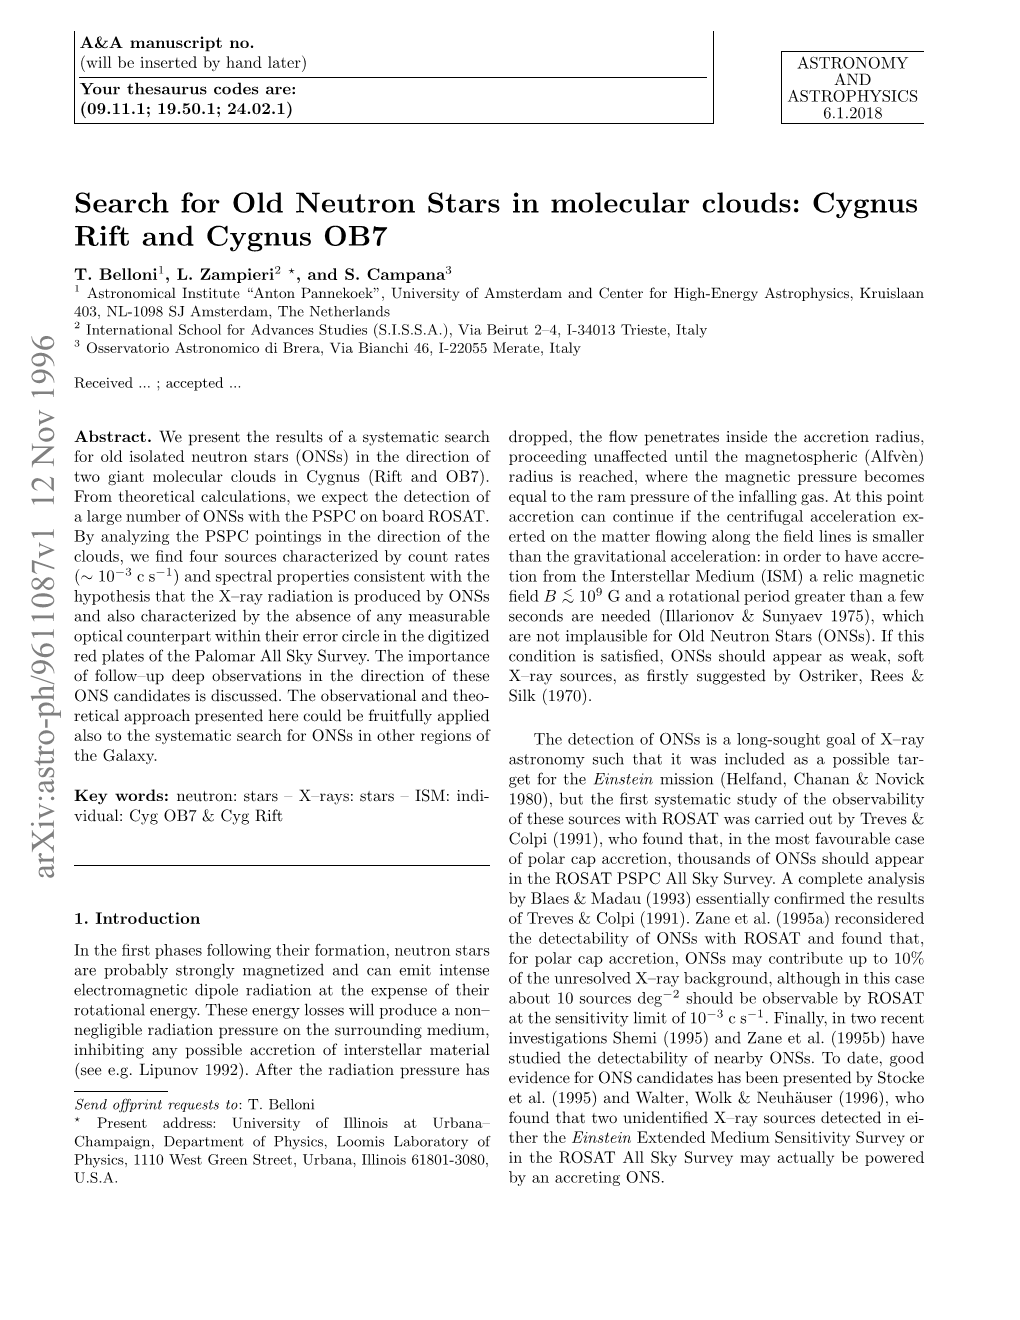 Search for Old Neutron Stars in Molecular Clouds: Cygnus Rift and Cygnus OB7